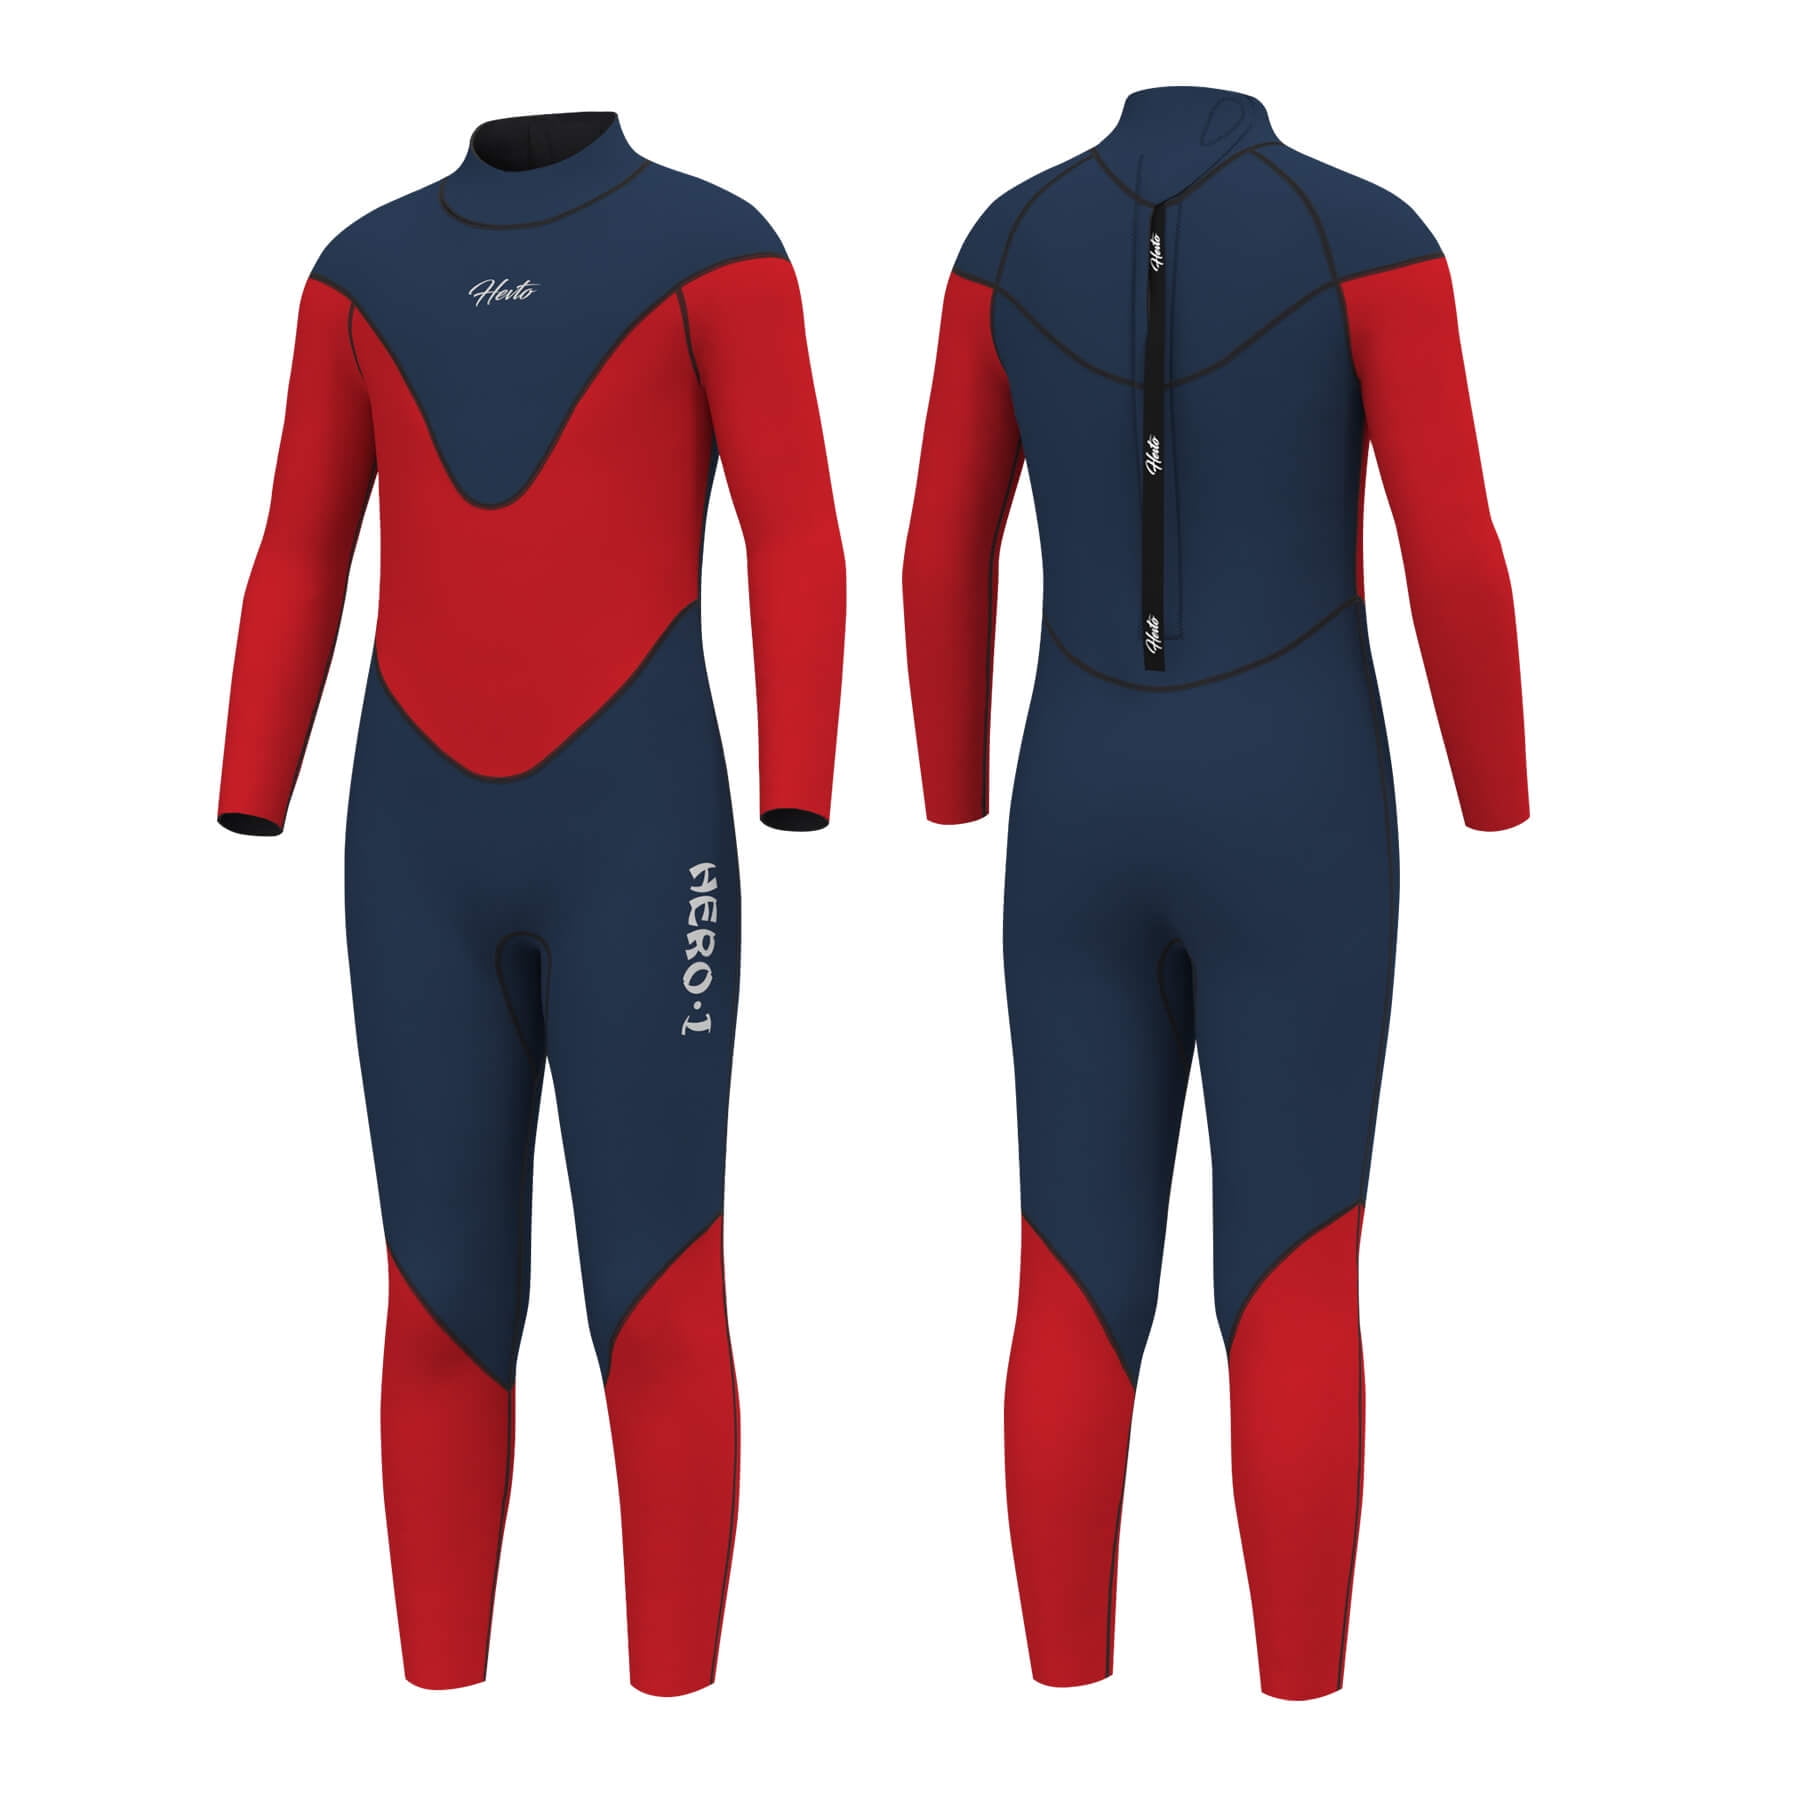 Hevto Wetsuits Kids and Youth 3mm Neoprene Full Suits Long Sleeve Surfing Swimming Diving Swimsuits Keep Warm Back Zip for Water Sports 